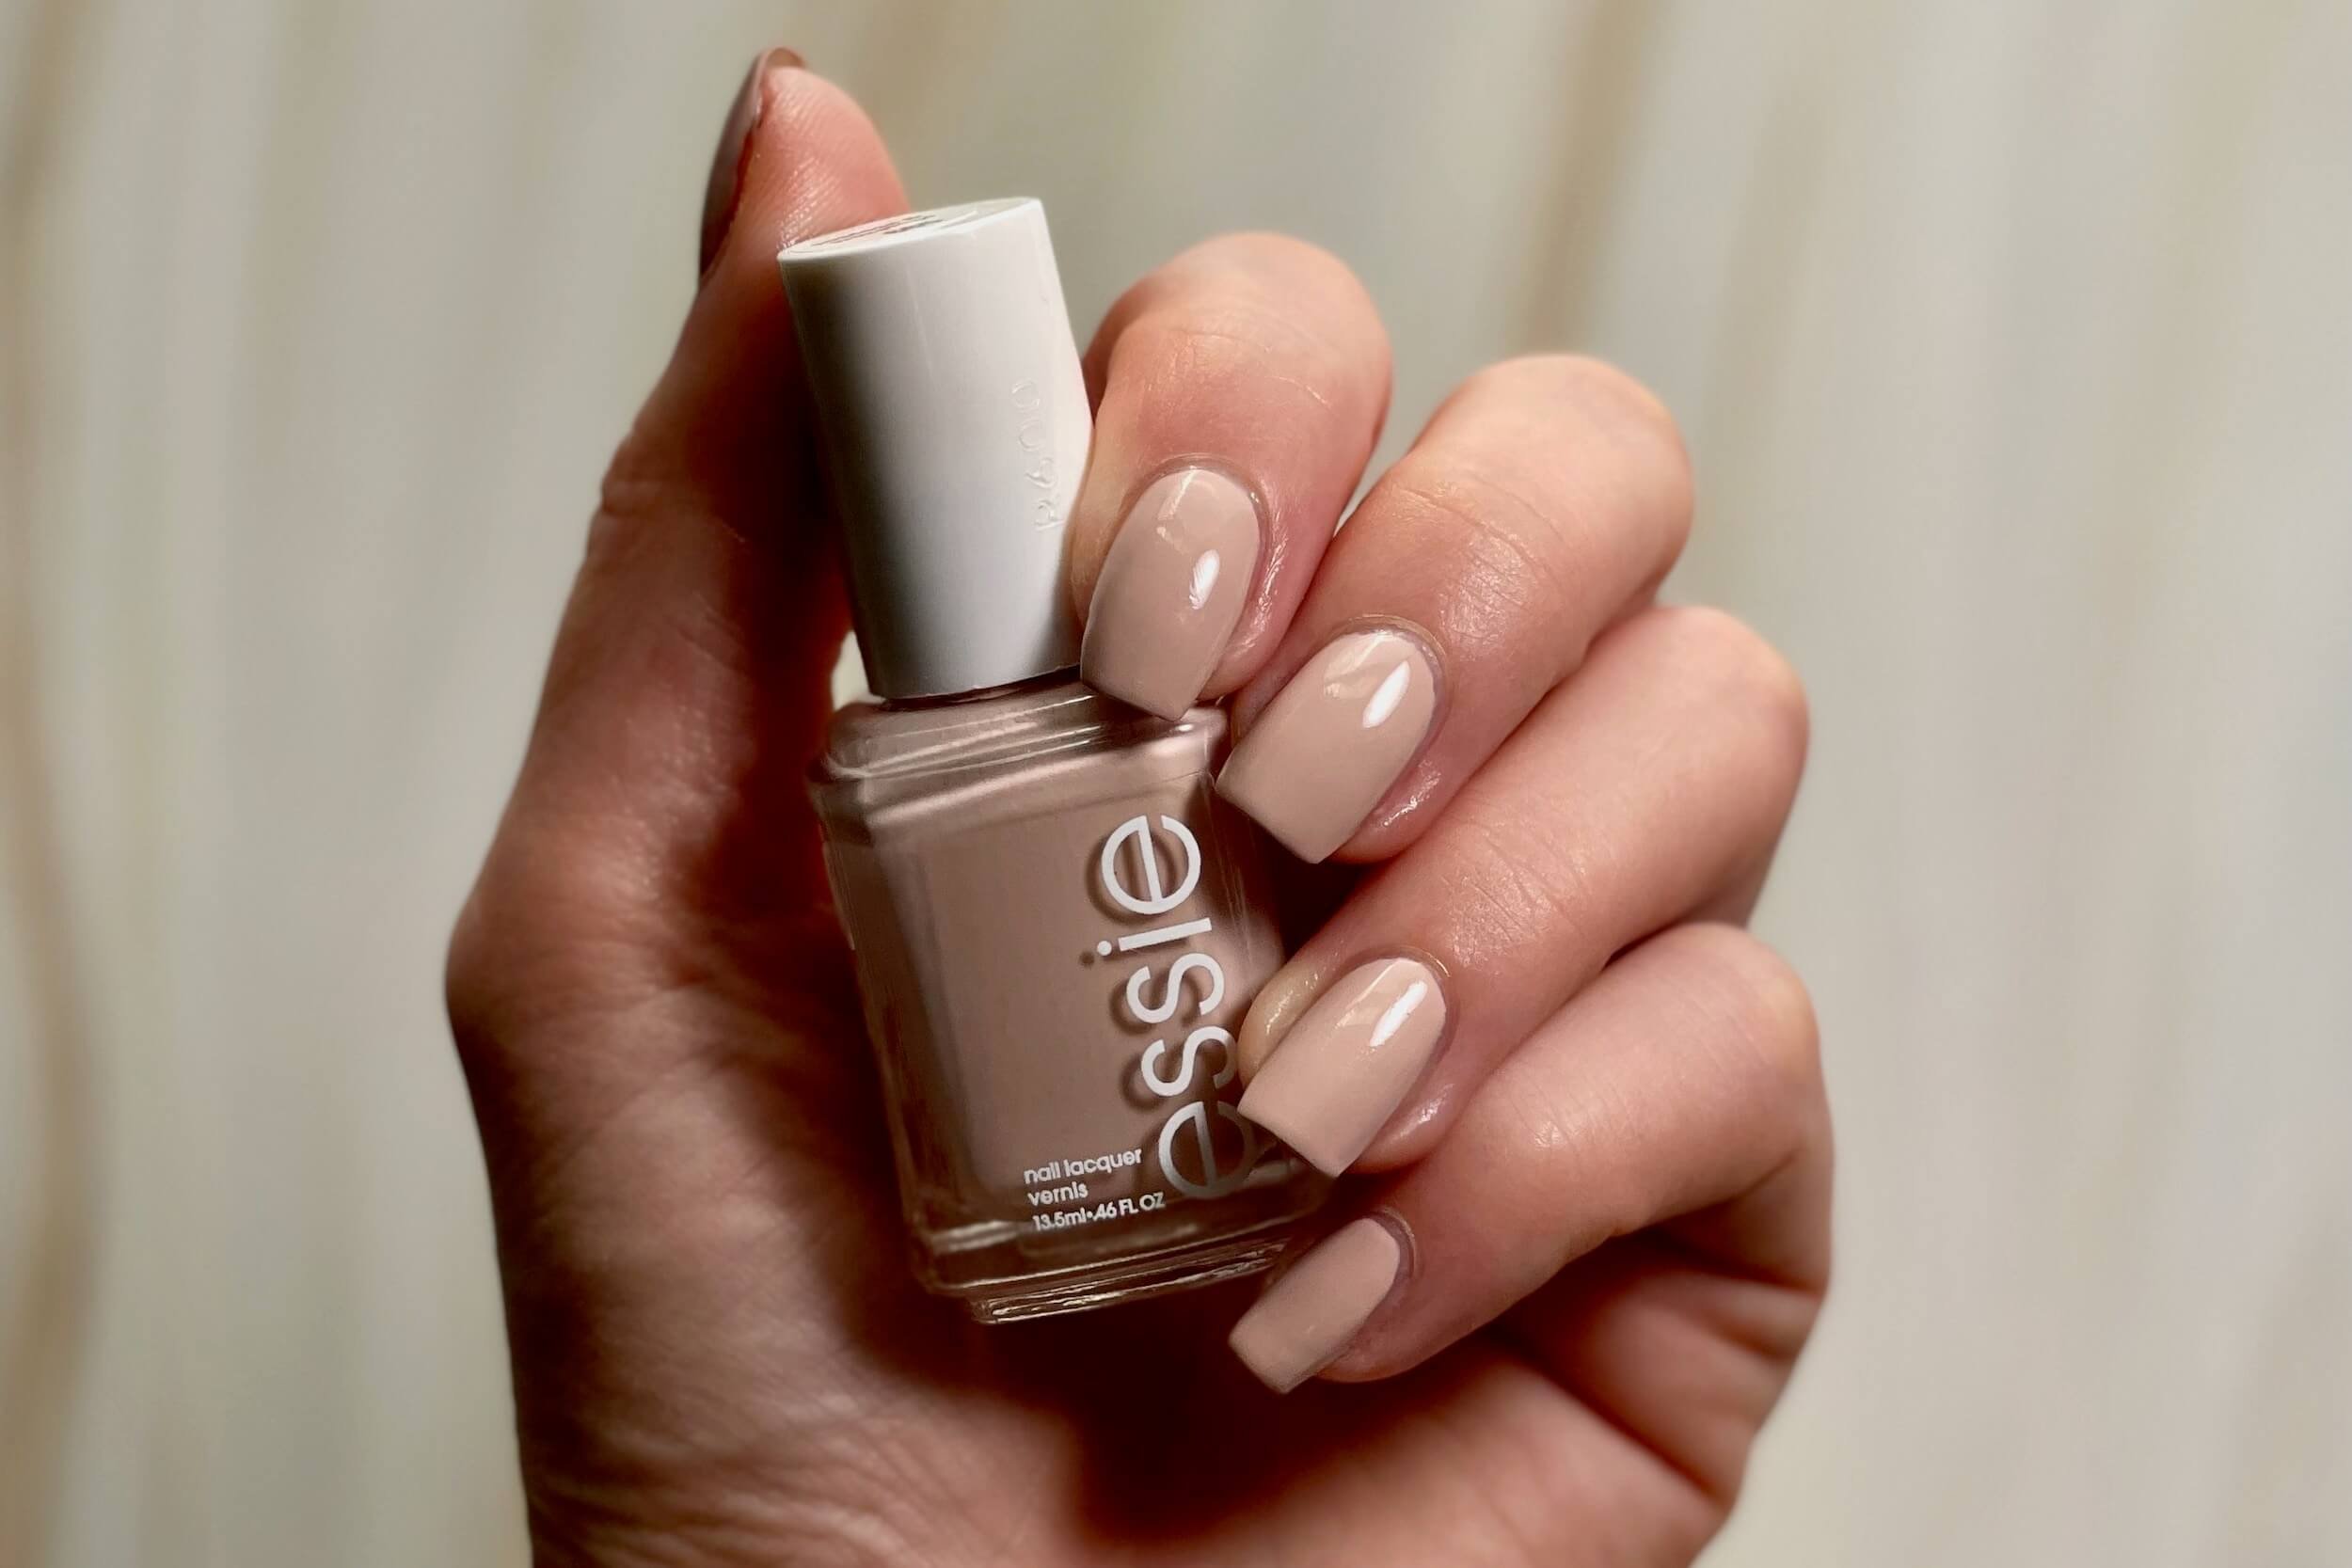 2. "Essie Topless and Barefoot" - wide 4